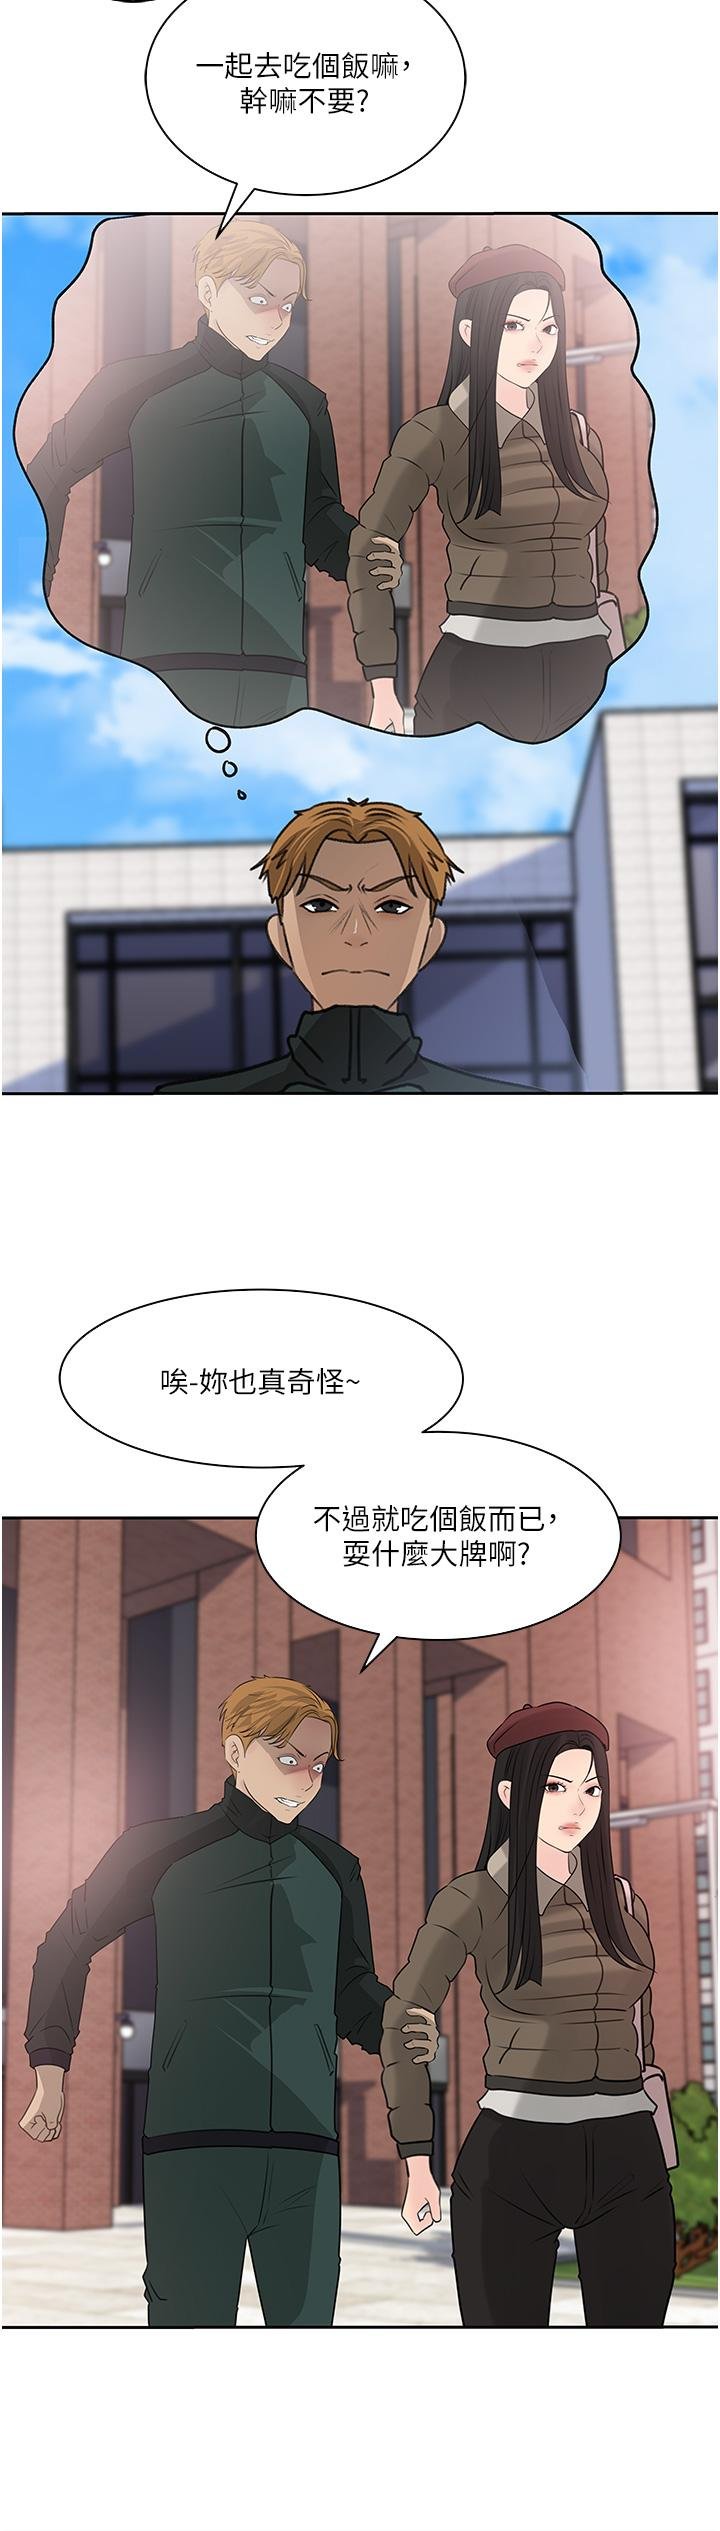 in-my-sister-in-law-raw-chap-39-1